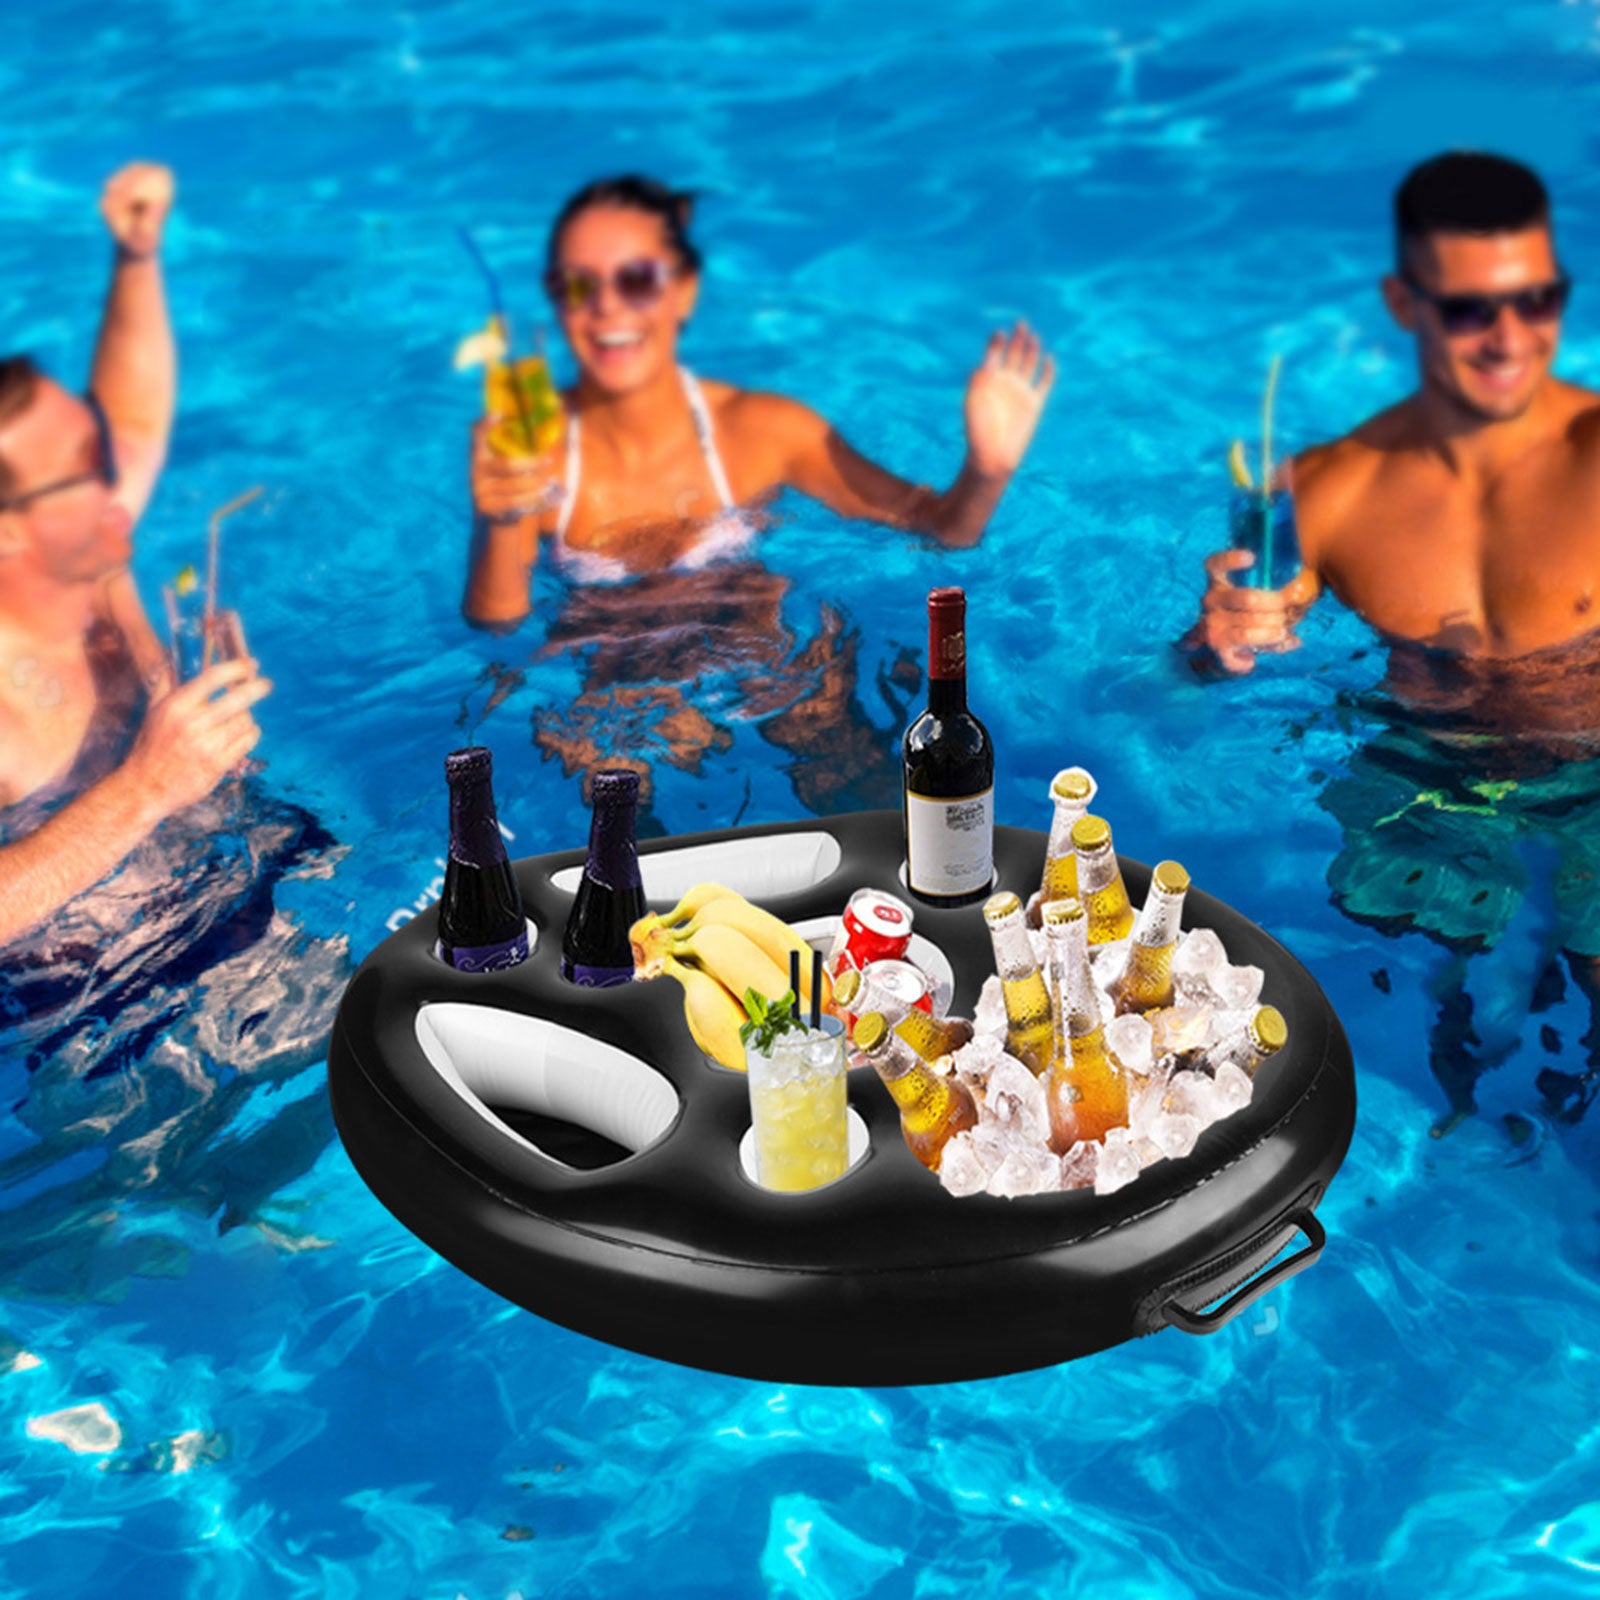 Balerz Floating Drinks Holder Pool Beach Party Snacks Beverage Holder Tray Floating Pool Drinks Stand Outdoor Swimming Pool Accessories